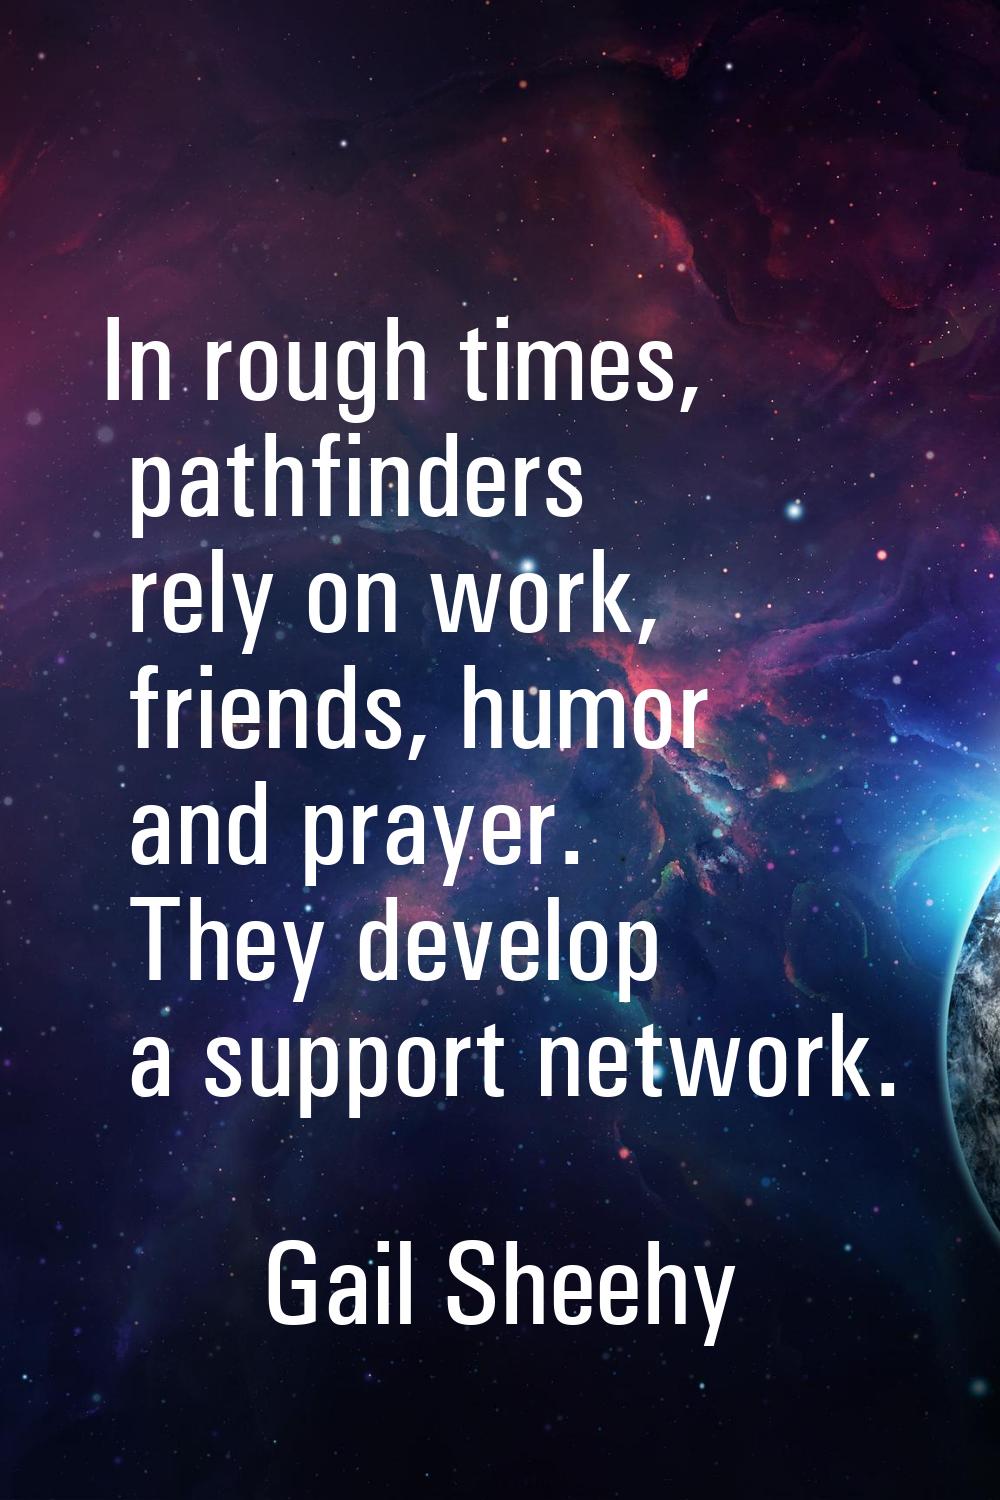 In rough times, pathfinders rely on work, friends, humor and prayer. They develop a support network